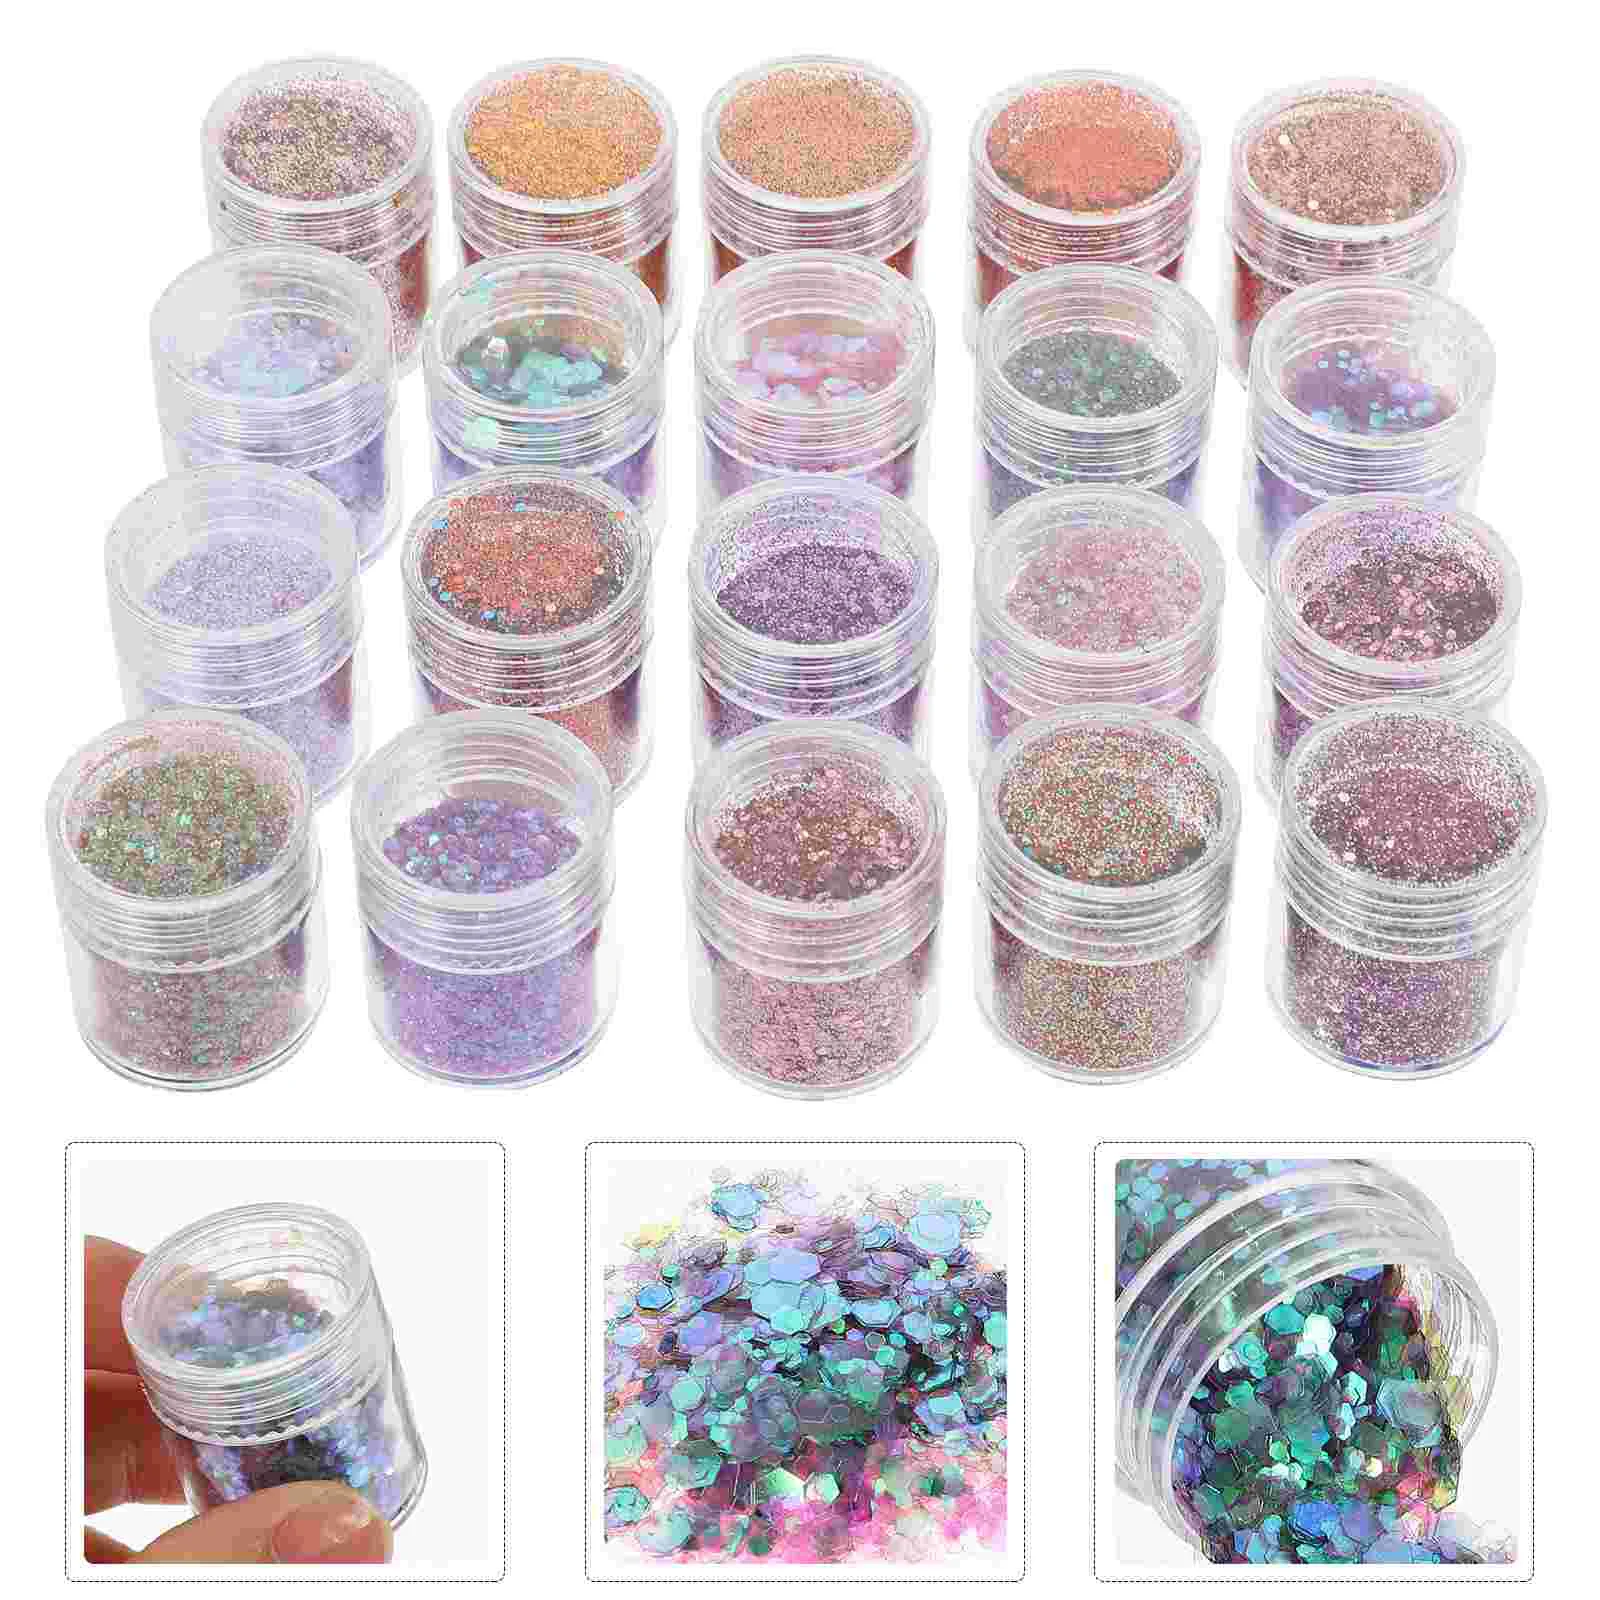 

20 Bottles Nail Glitters Manicure Accessories Nails Decoration Sequin Ornaments Shining Pieces Sugar Supplies